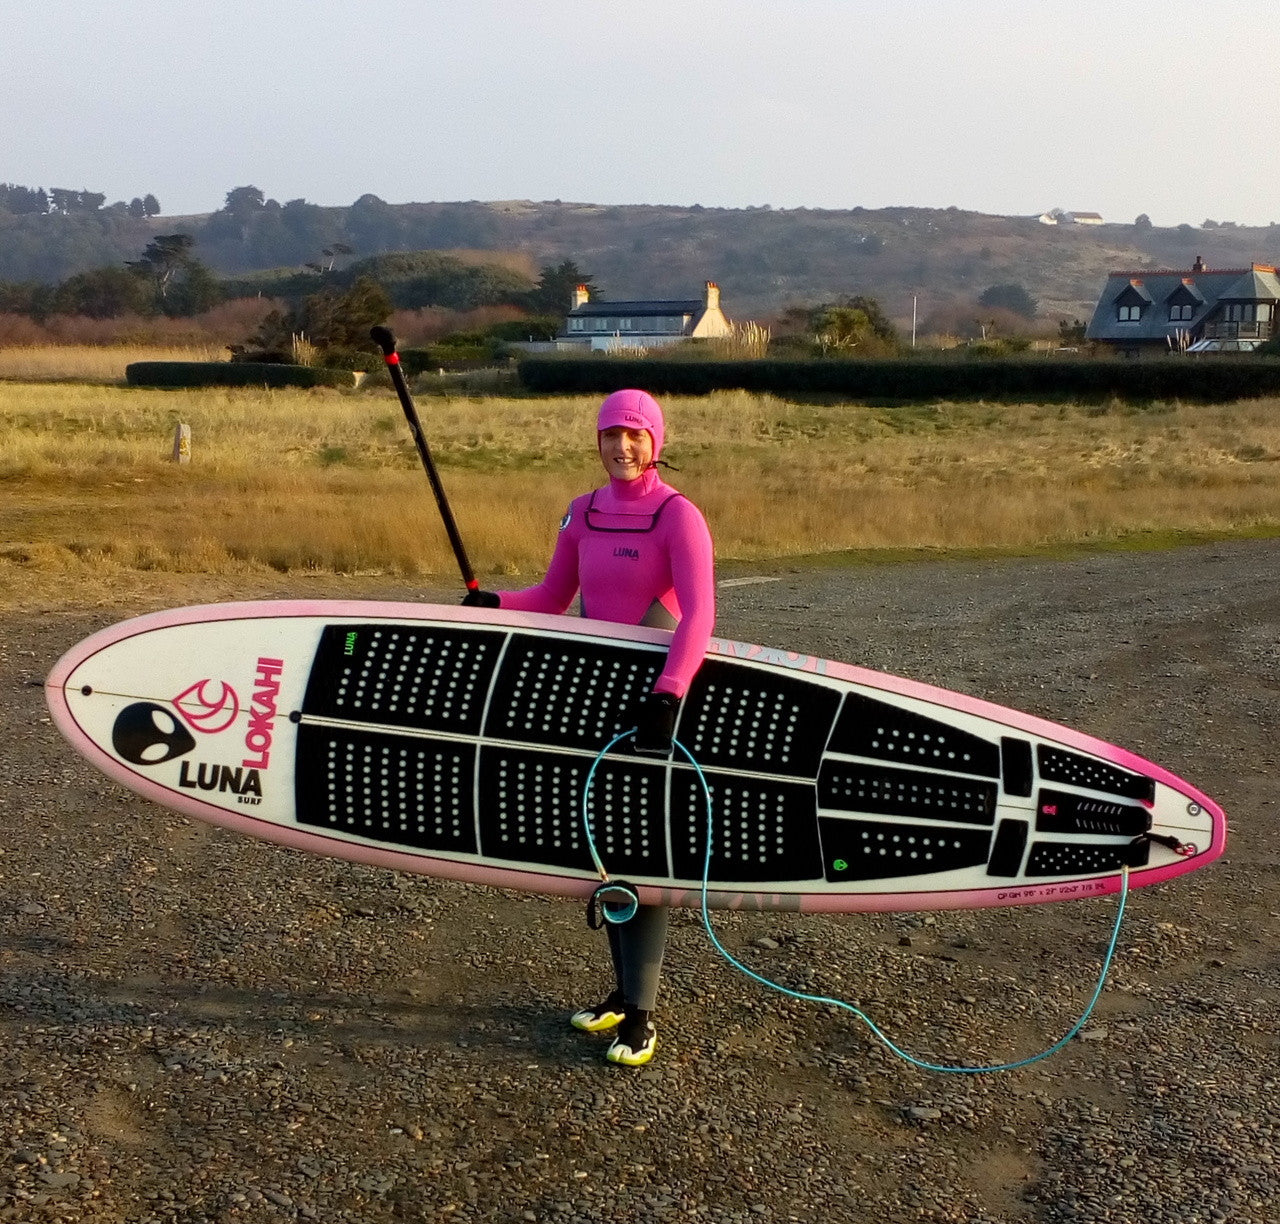 Verity Thomas SUPing with the Luna 9ft leash